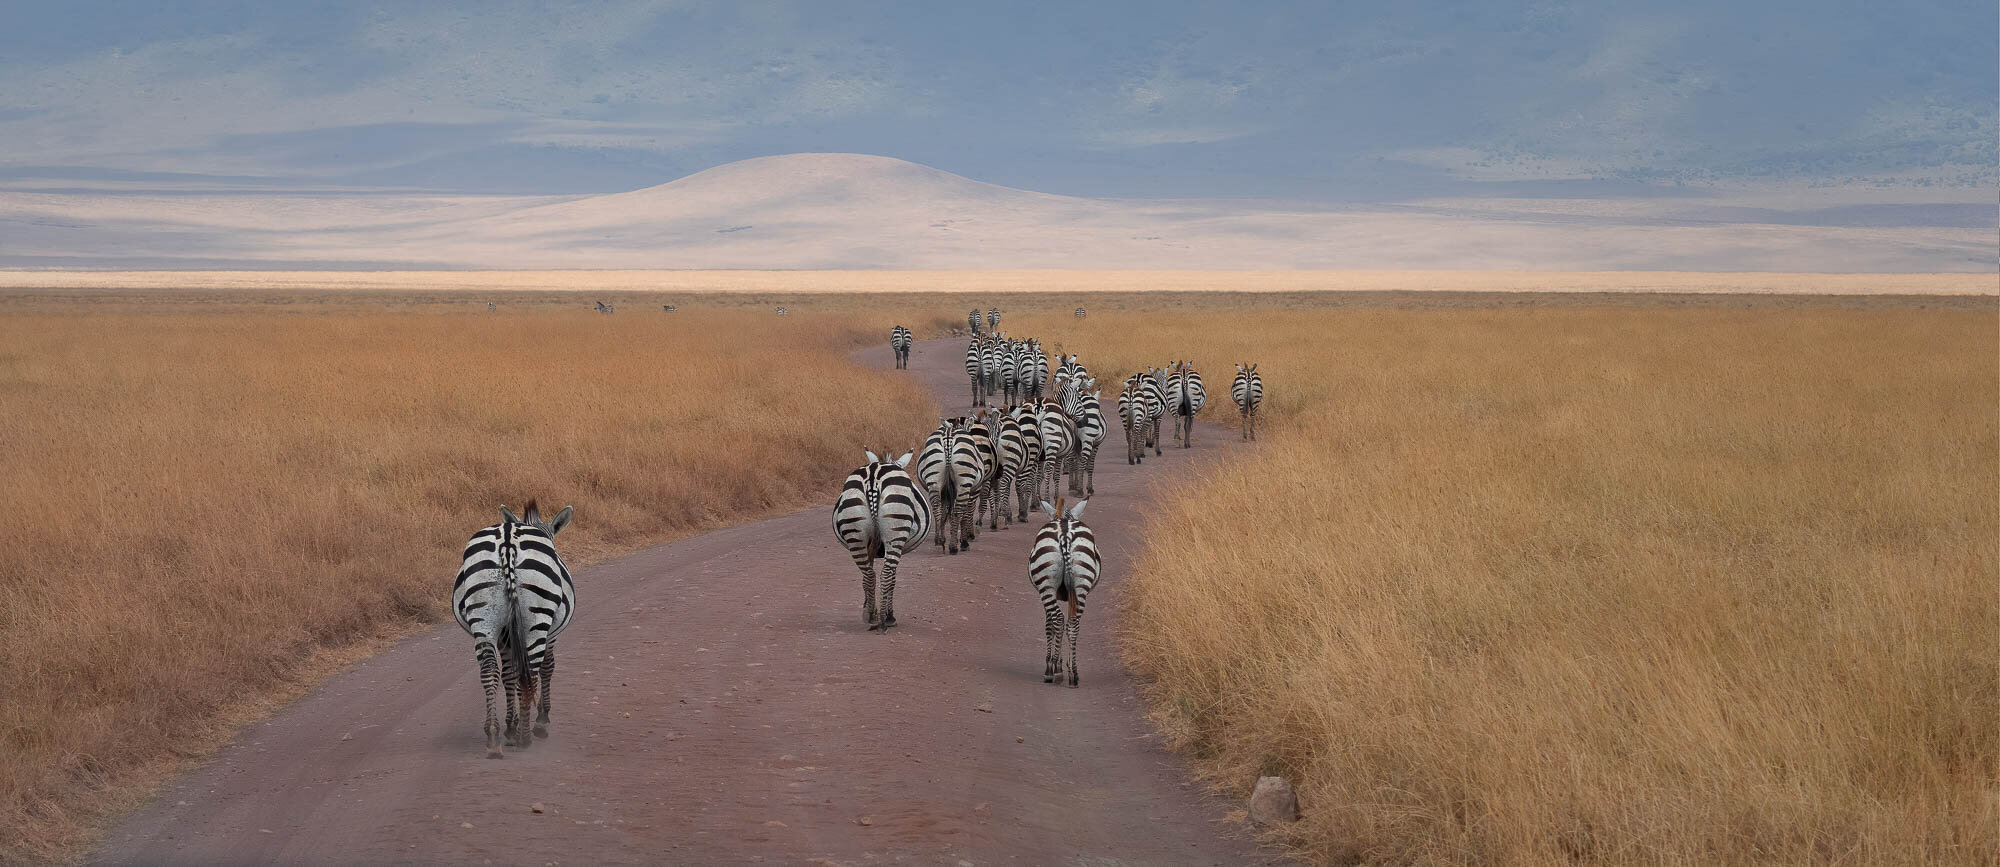 Honorable Mention: Zebras on the march by Charlie Johnson.jpg